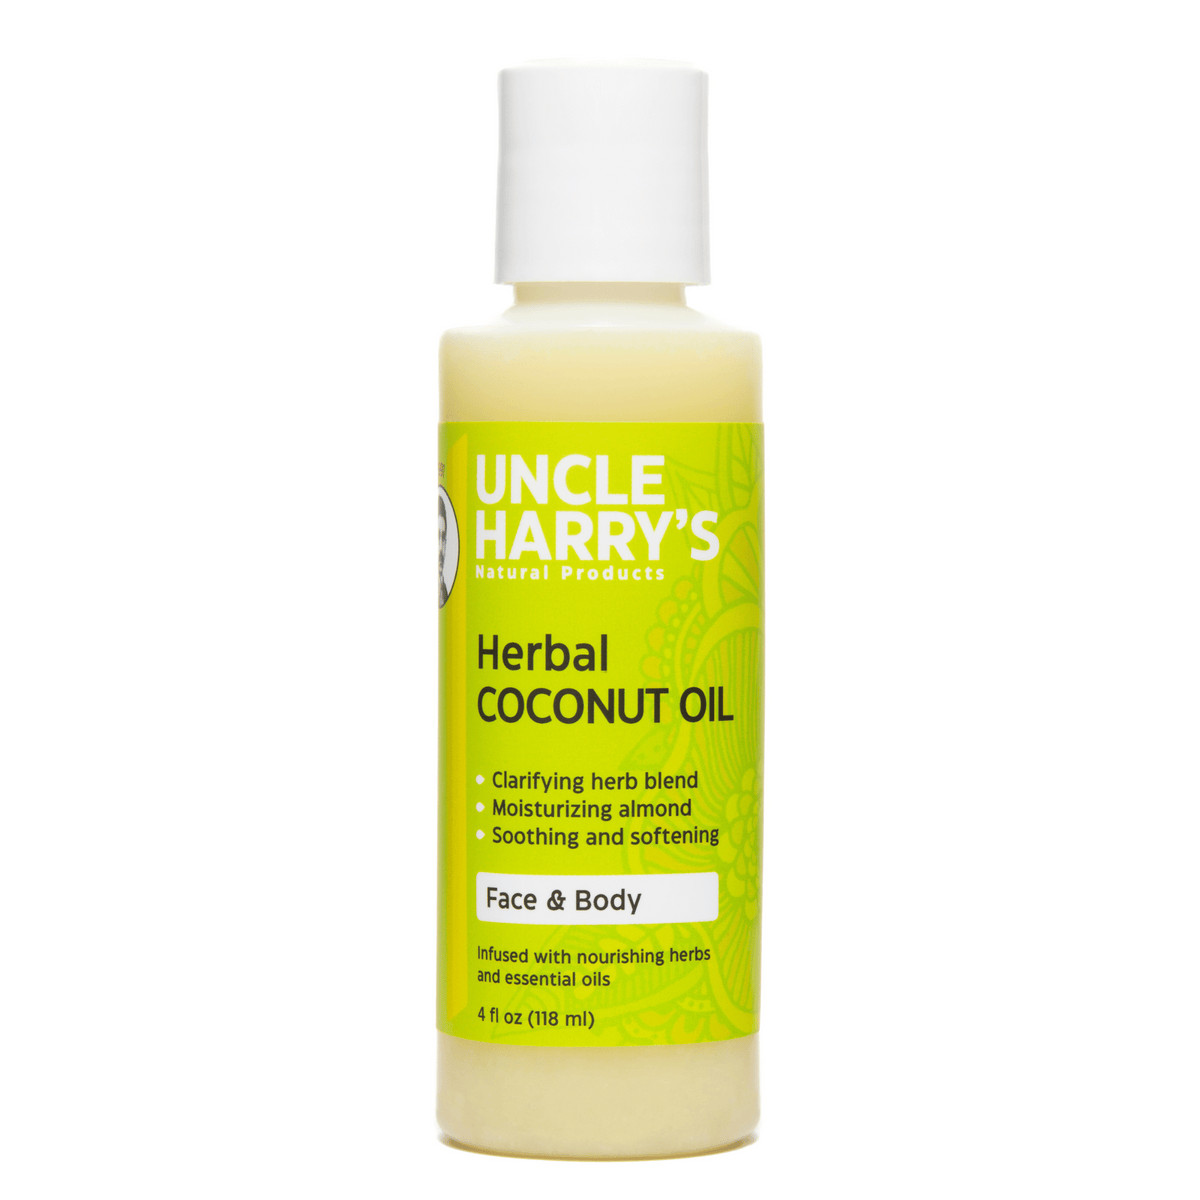 Primary Image of Herbal Coconut Oil for Face + Body